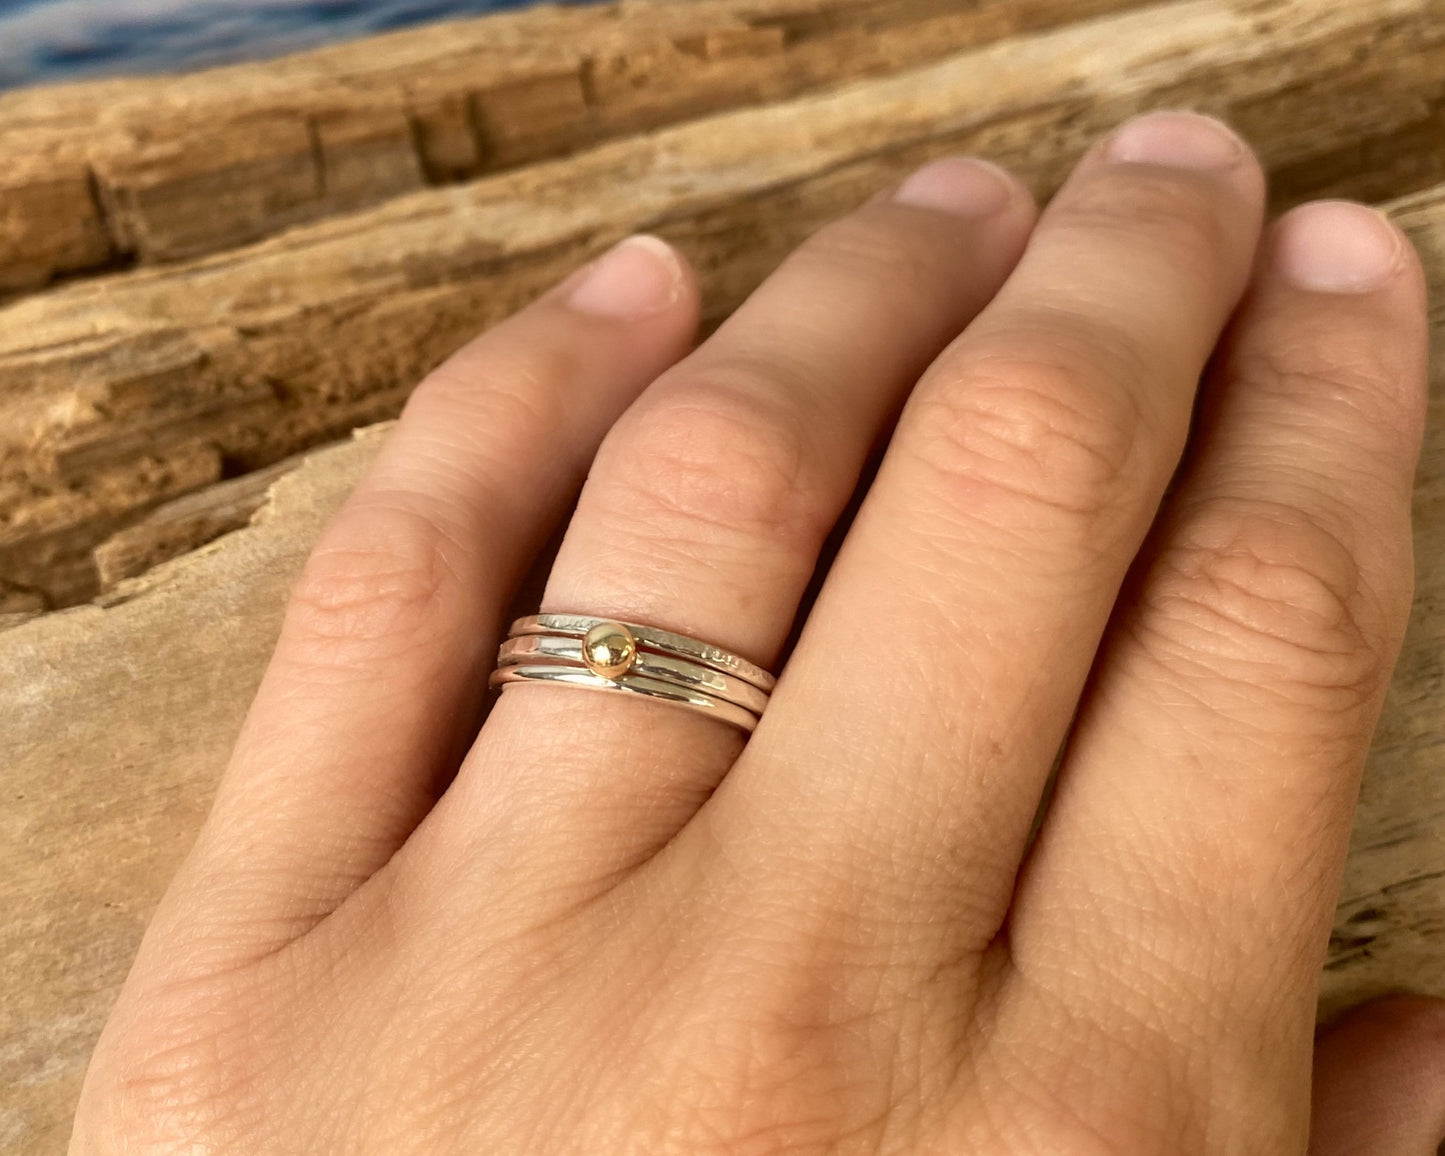 Hallmarked 9ct Gold Nugget on a 1.8mm 925 Sterling Silver Ring, Hammered Ring Band, Handmade Stacking Ring, Minimalist Ring